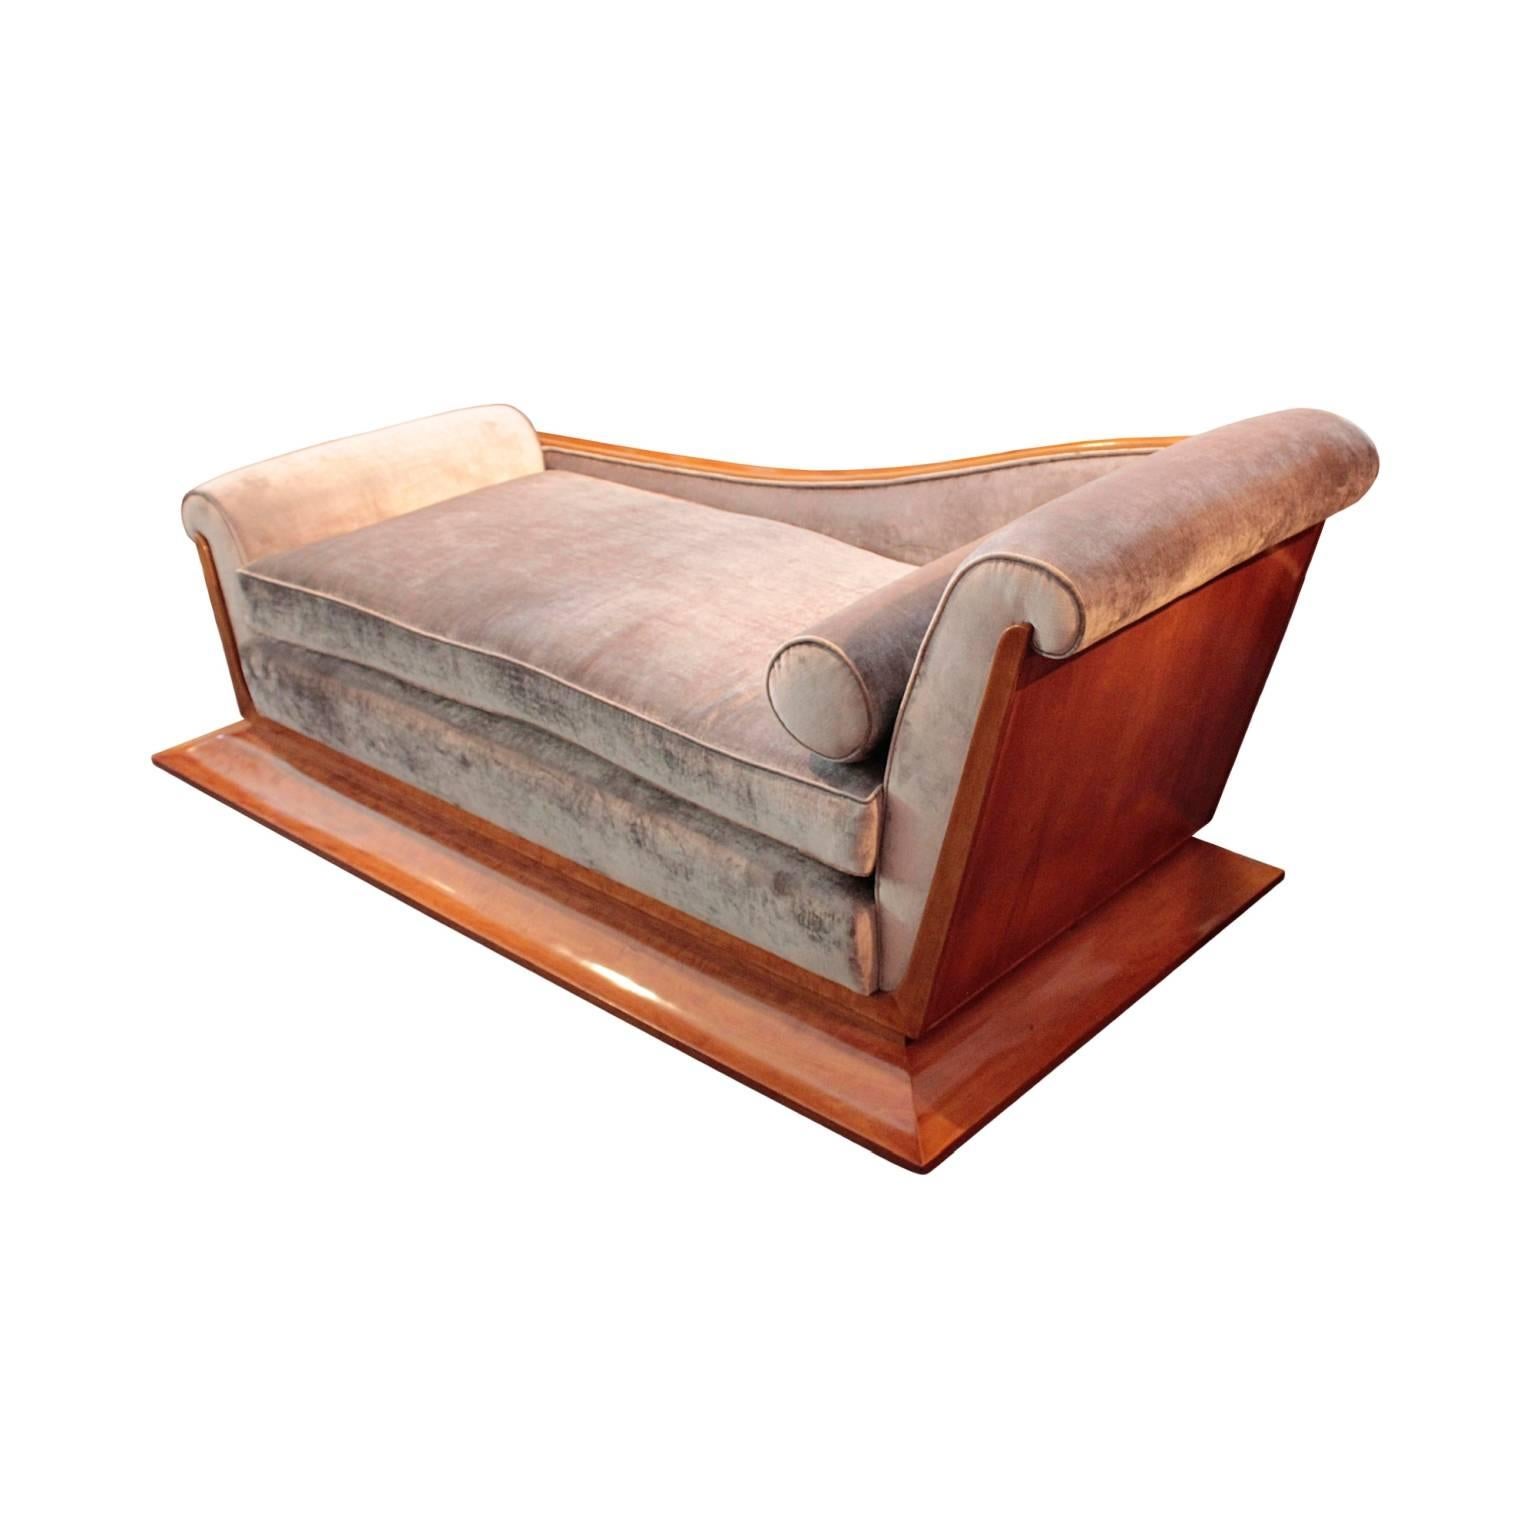 Exquisite French Art Deco period Recamier designed by Dominique (Andre Domin & Marcel Genevriere). Of classical design and sculptural quality featuring frustum shaped plinth base, fully veneered back and sides, large pillow seat and one bolster.